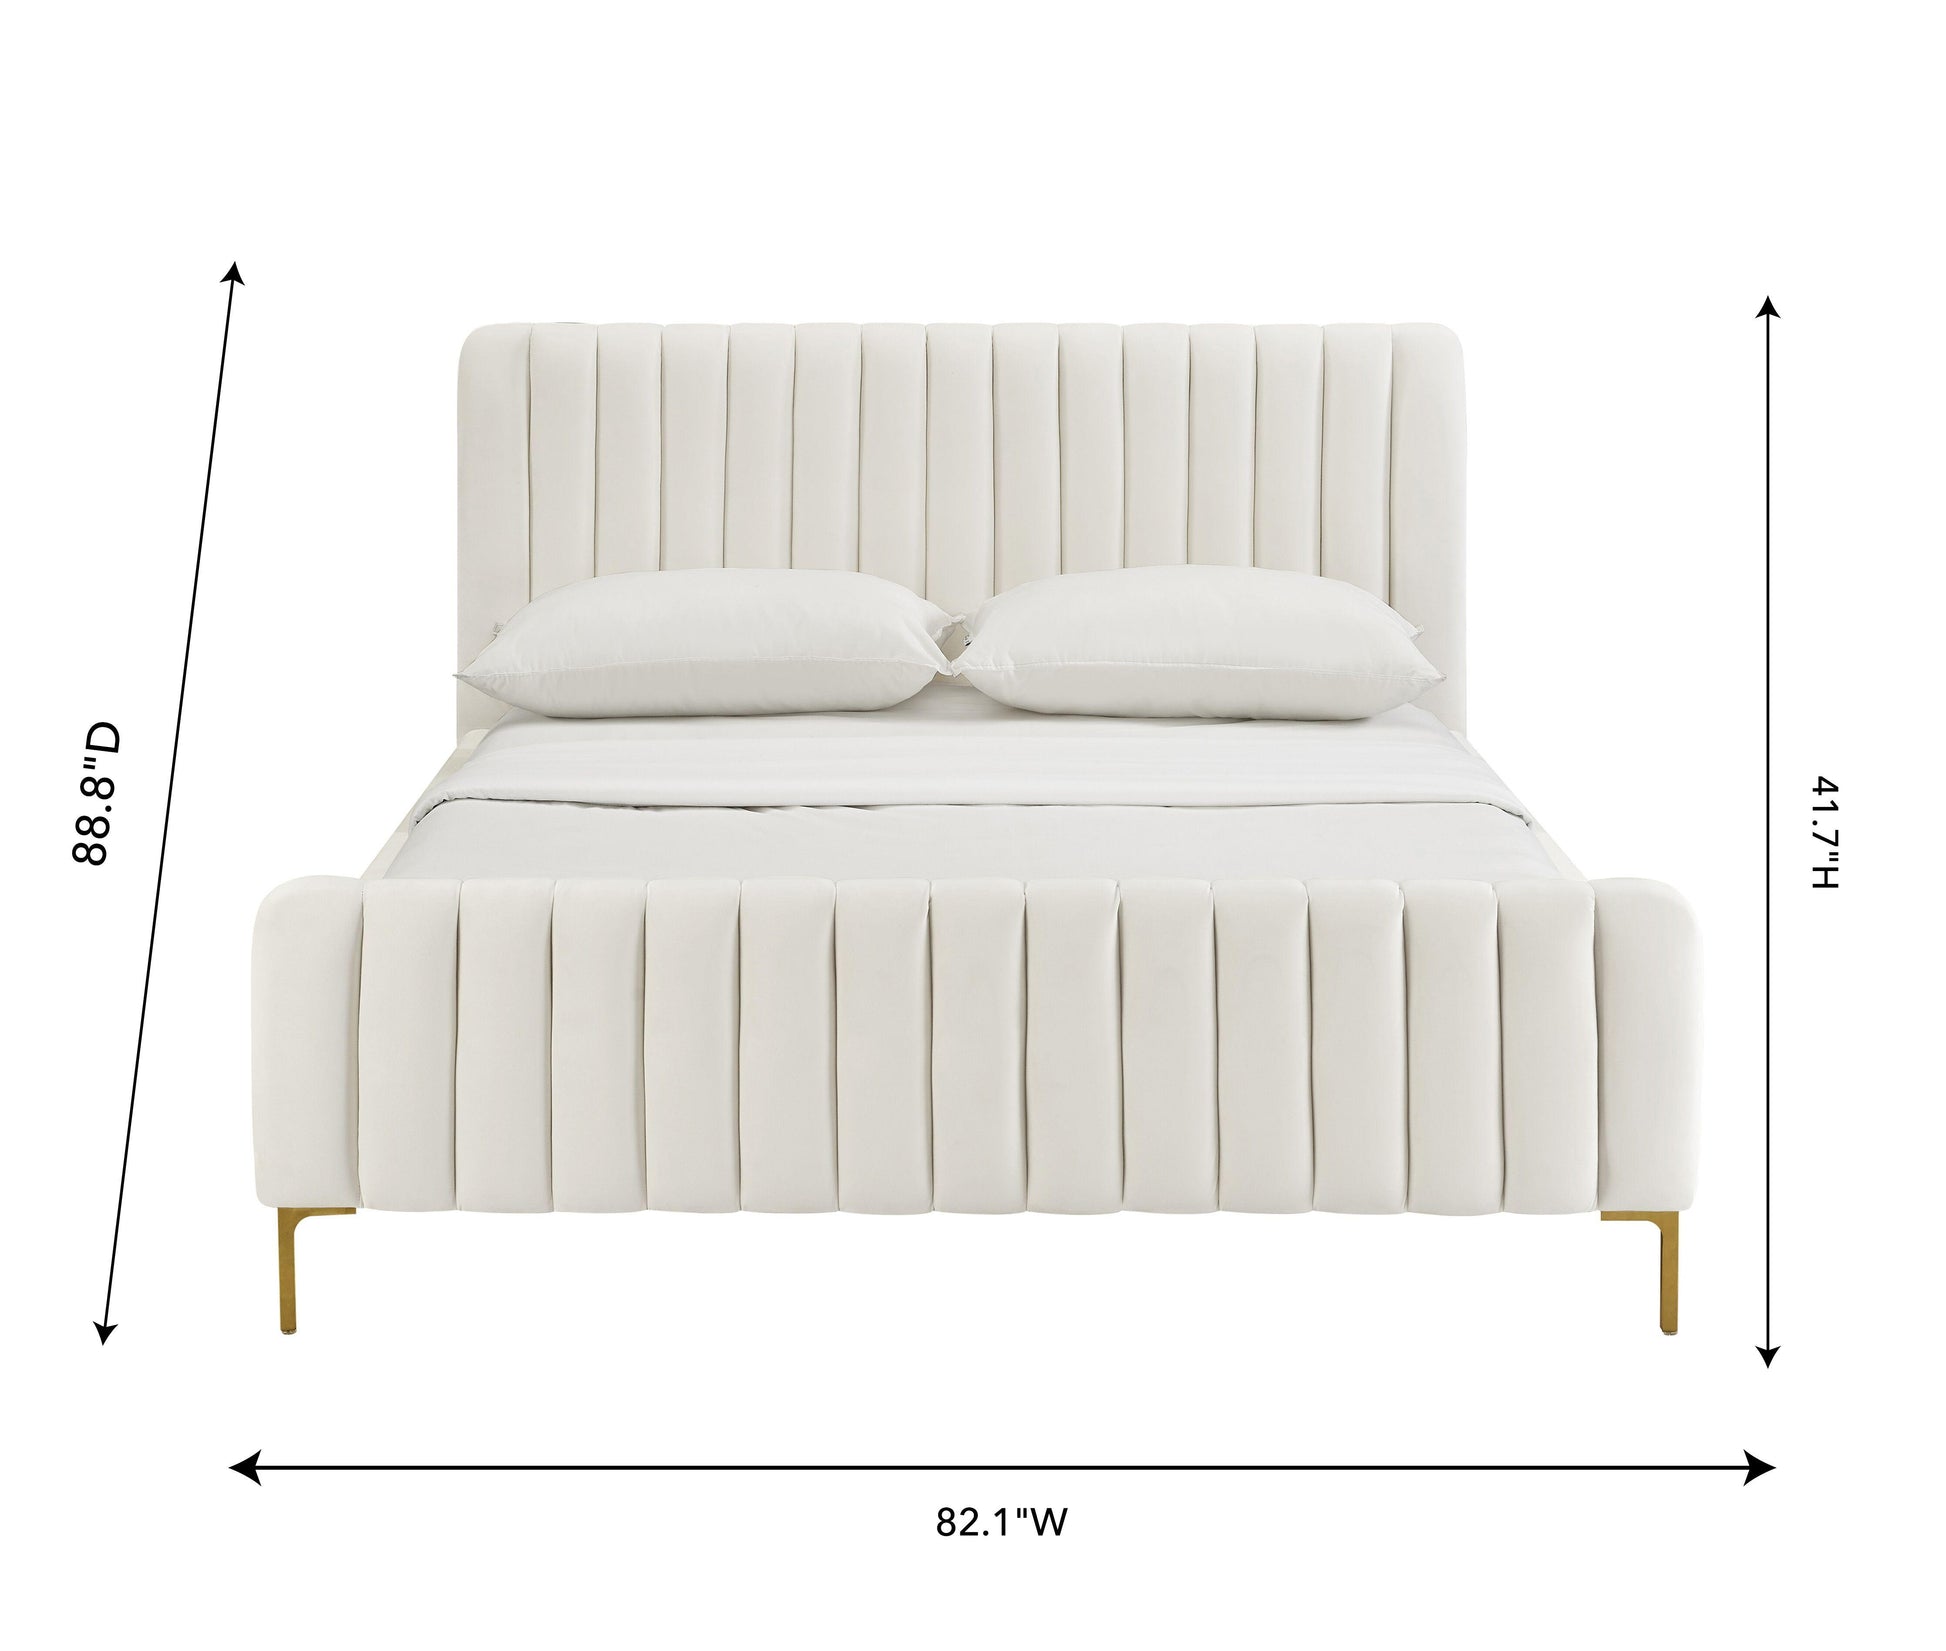 Angela Cream Bed King by TOV